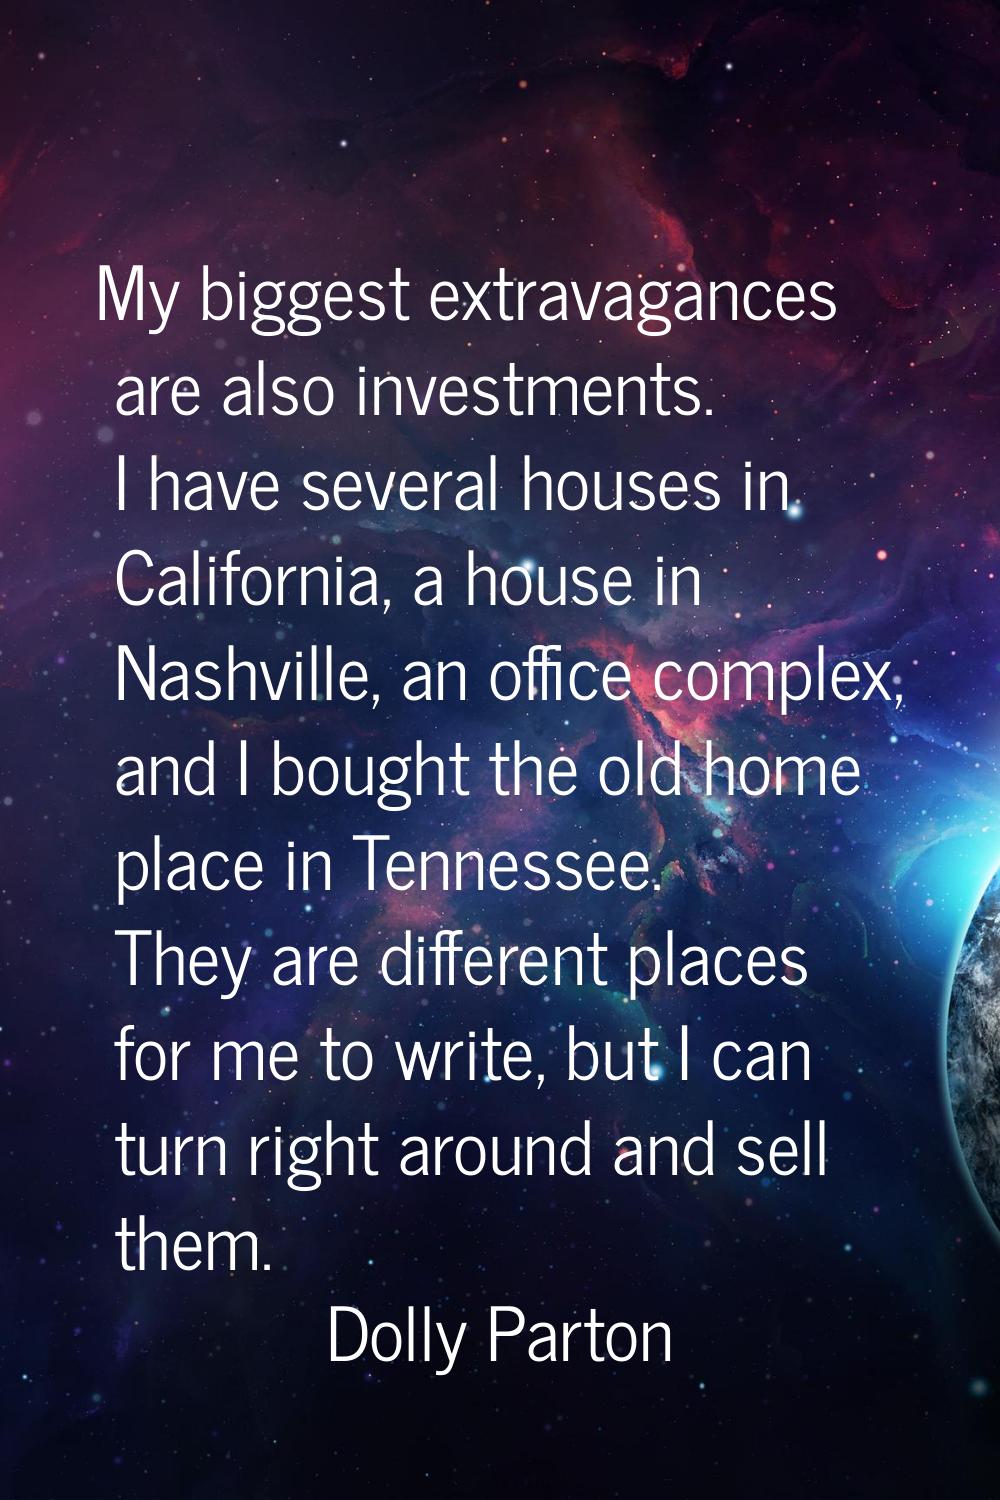 My biggest extravagances are also investments. I have several houses in California, a house in Nash